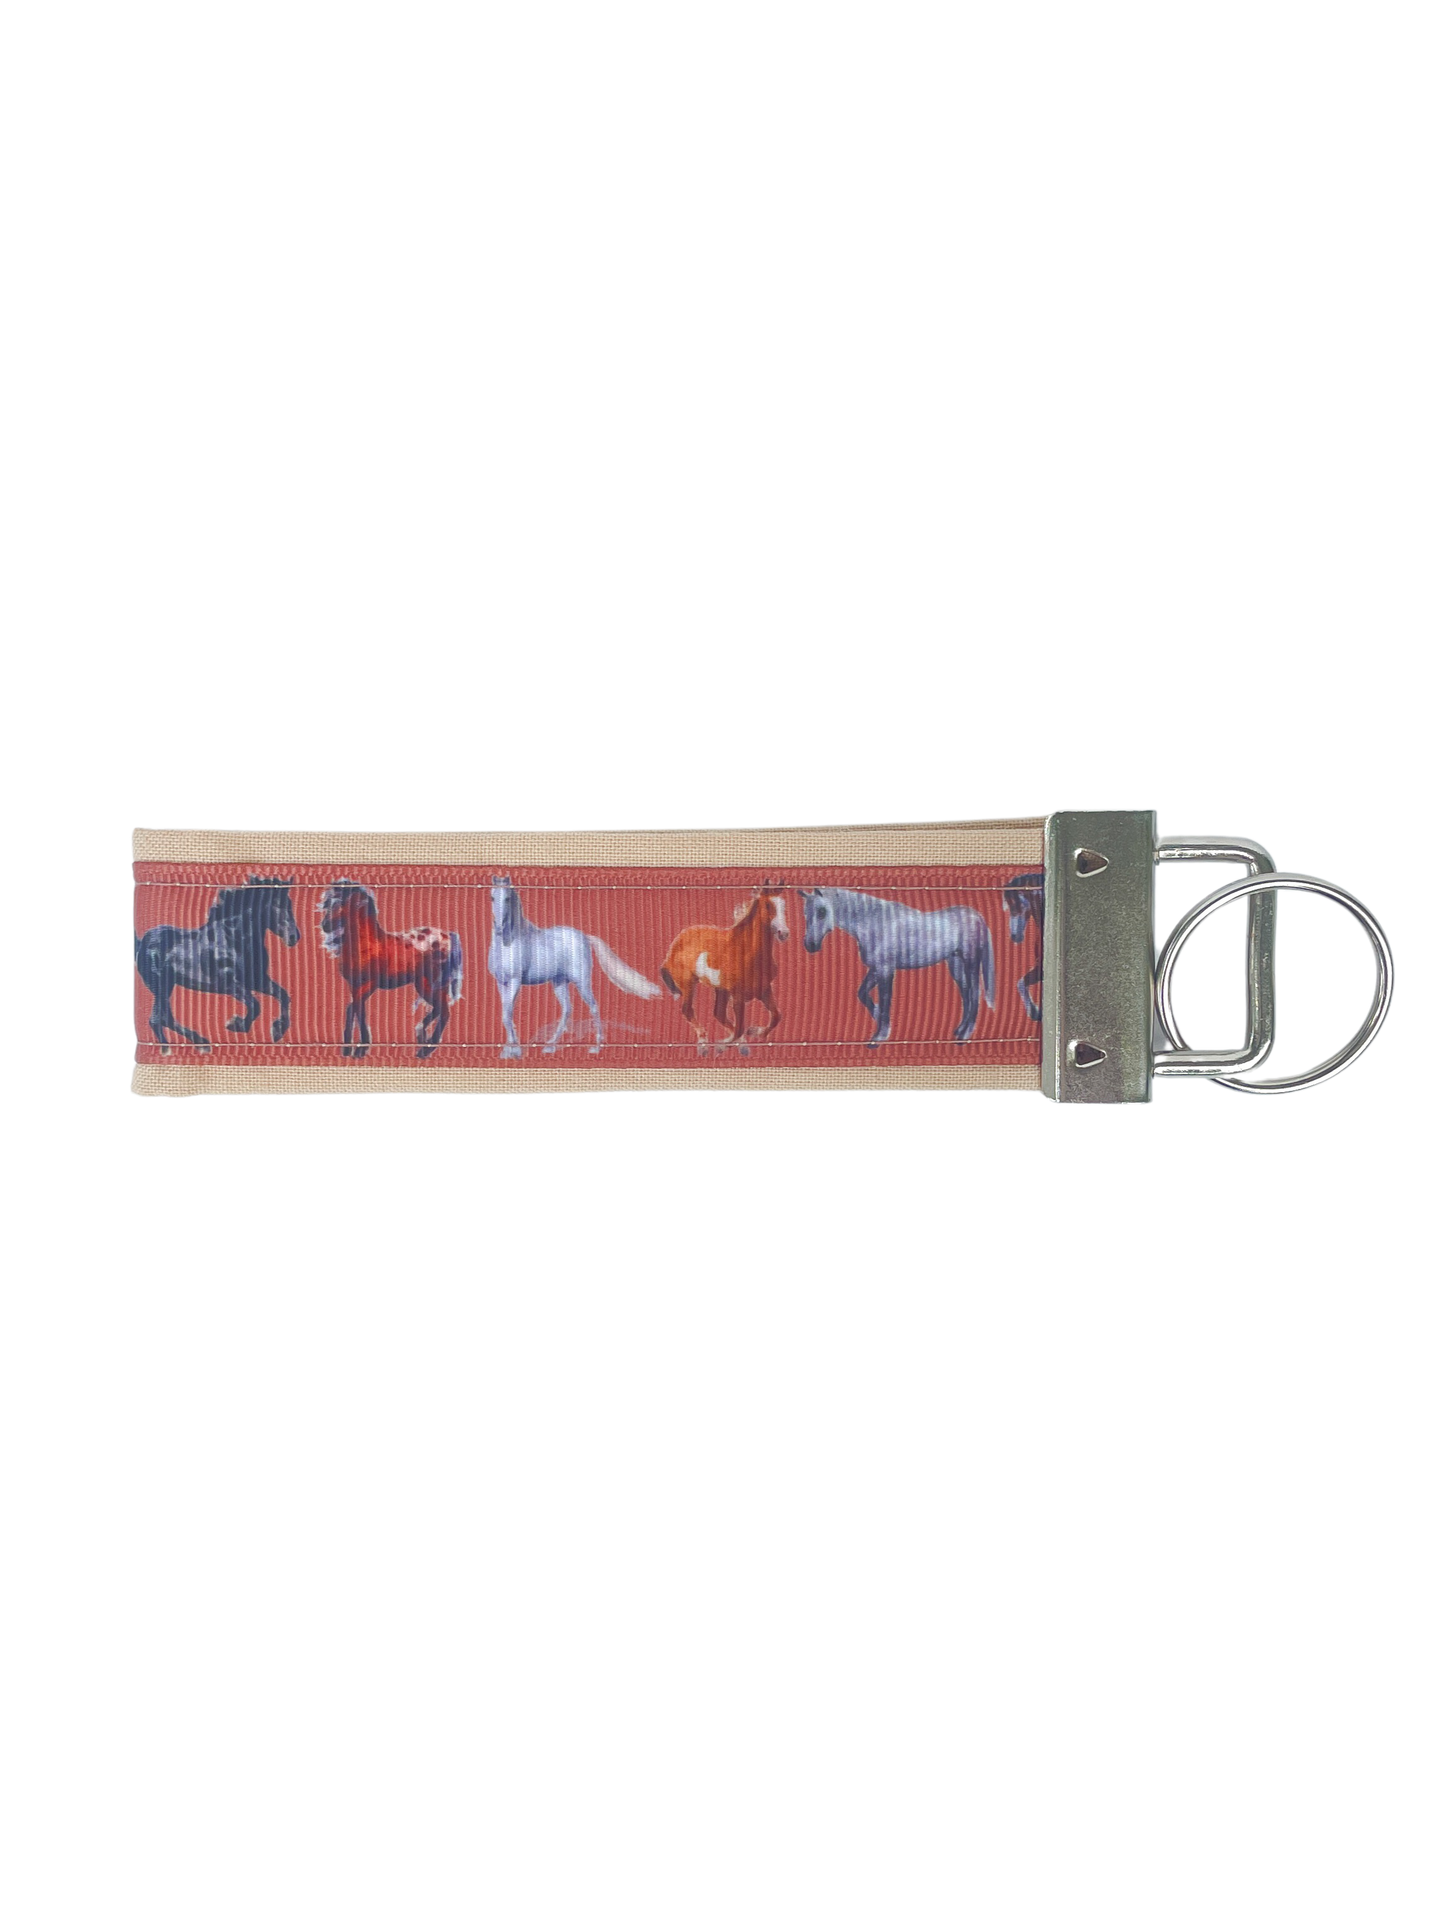 'A Horse of Many Colors' Keychain